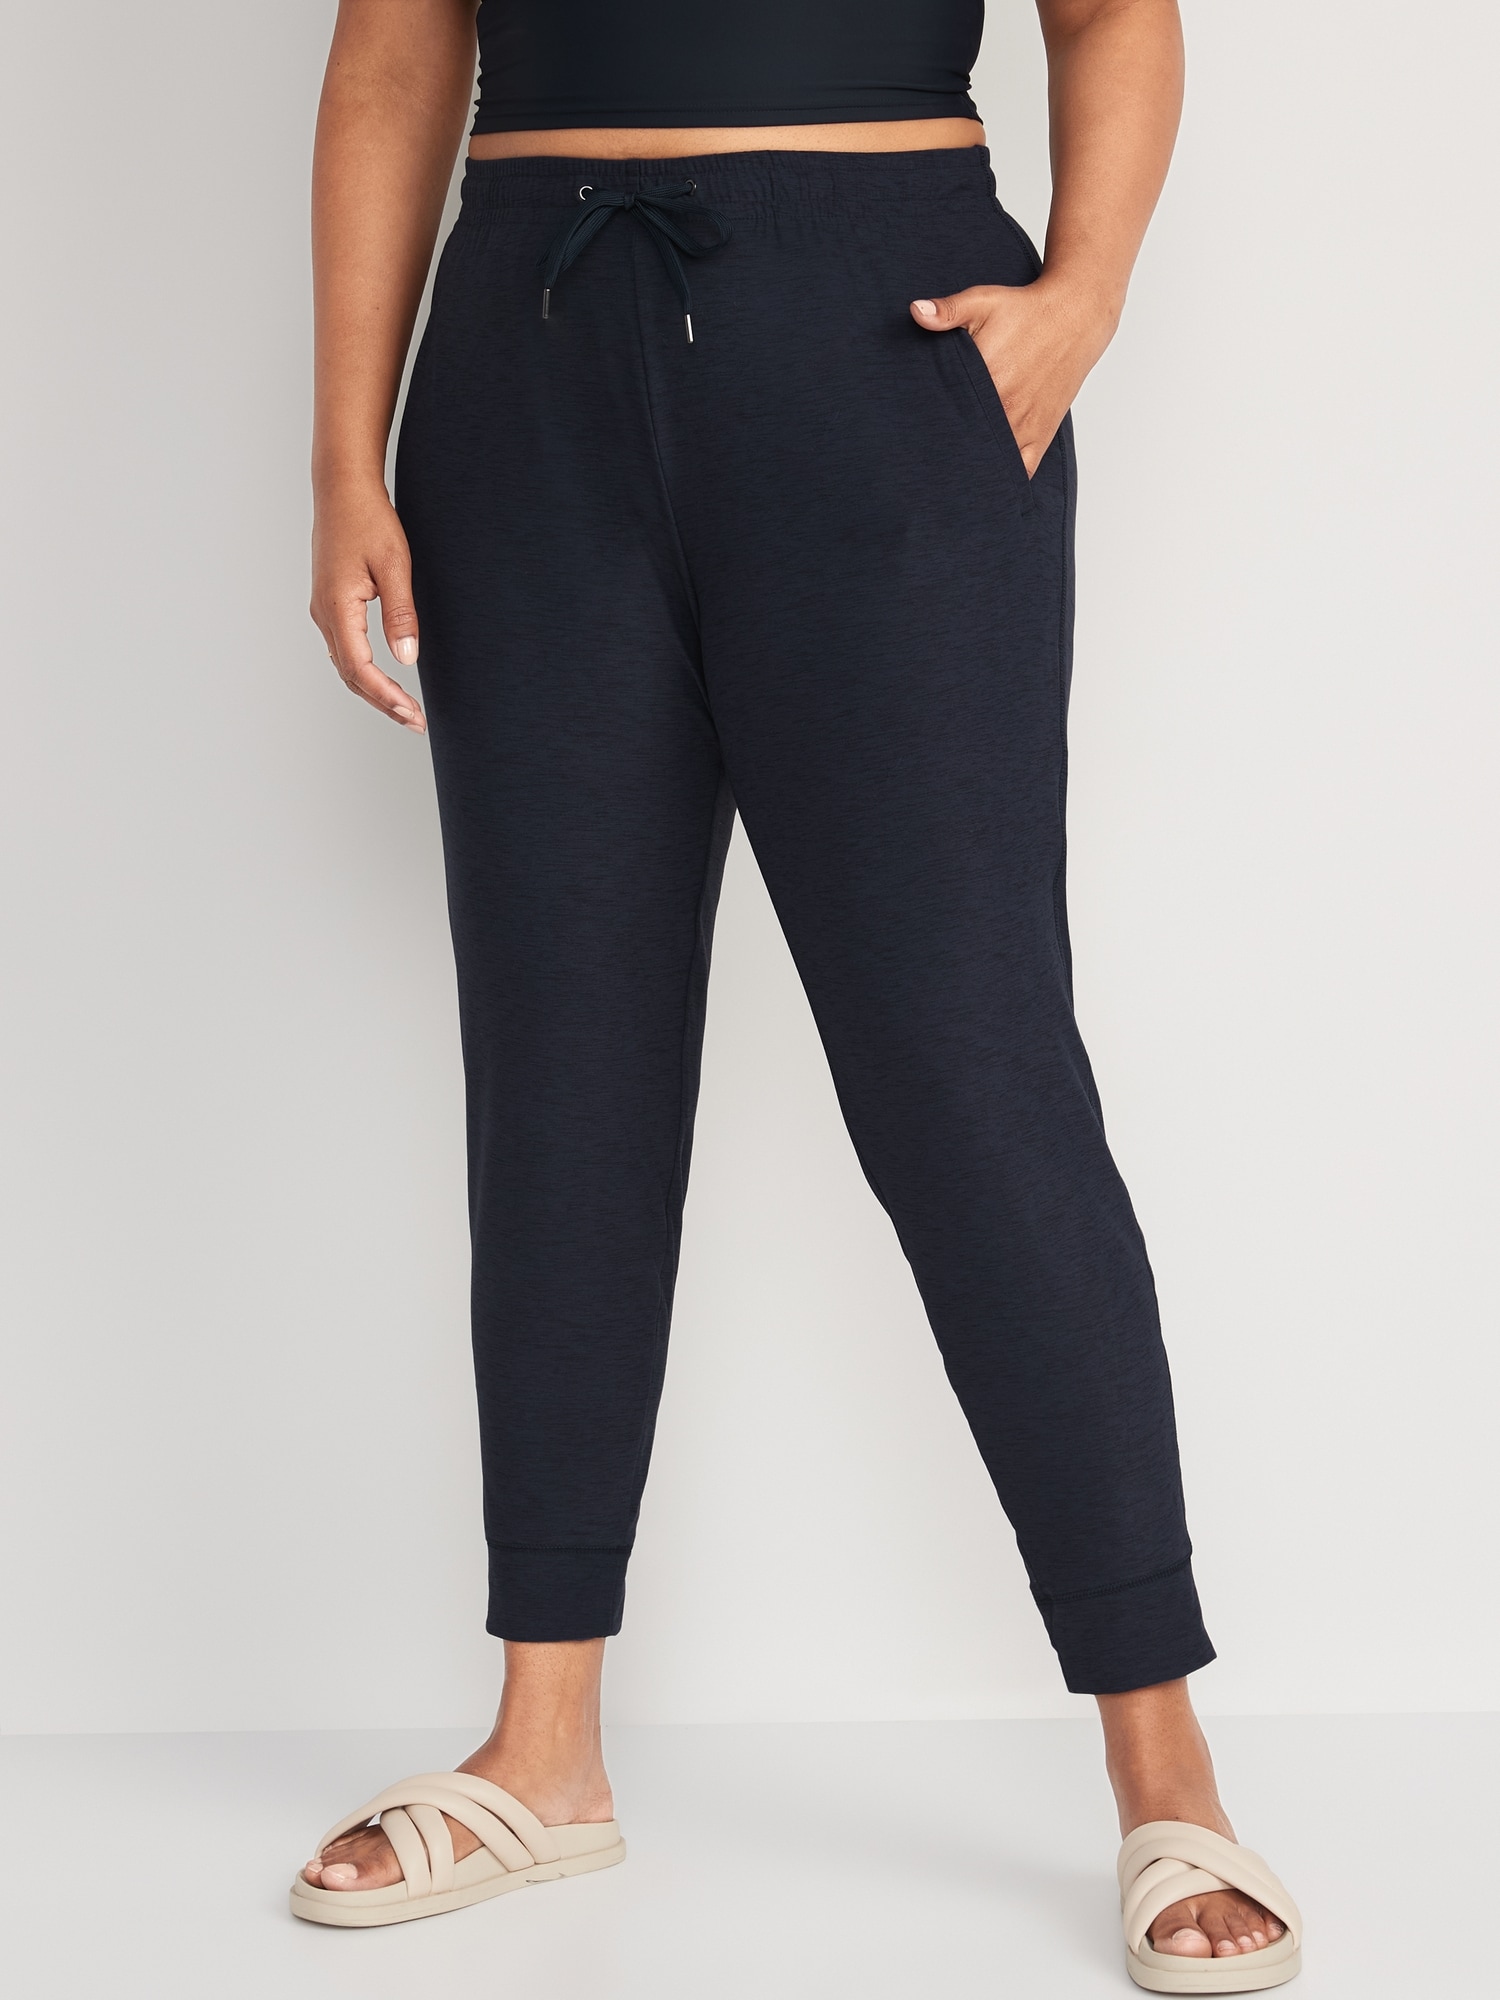 Mid-Rise Breathe ON Jogger Pants for Women